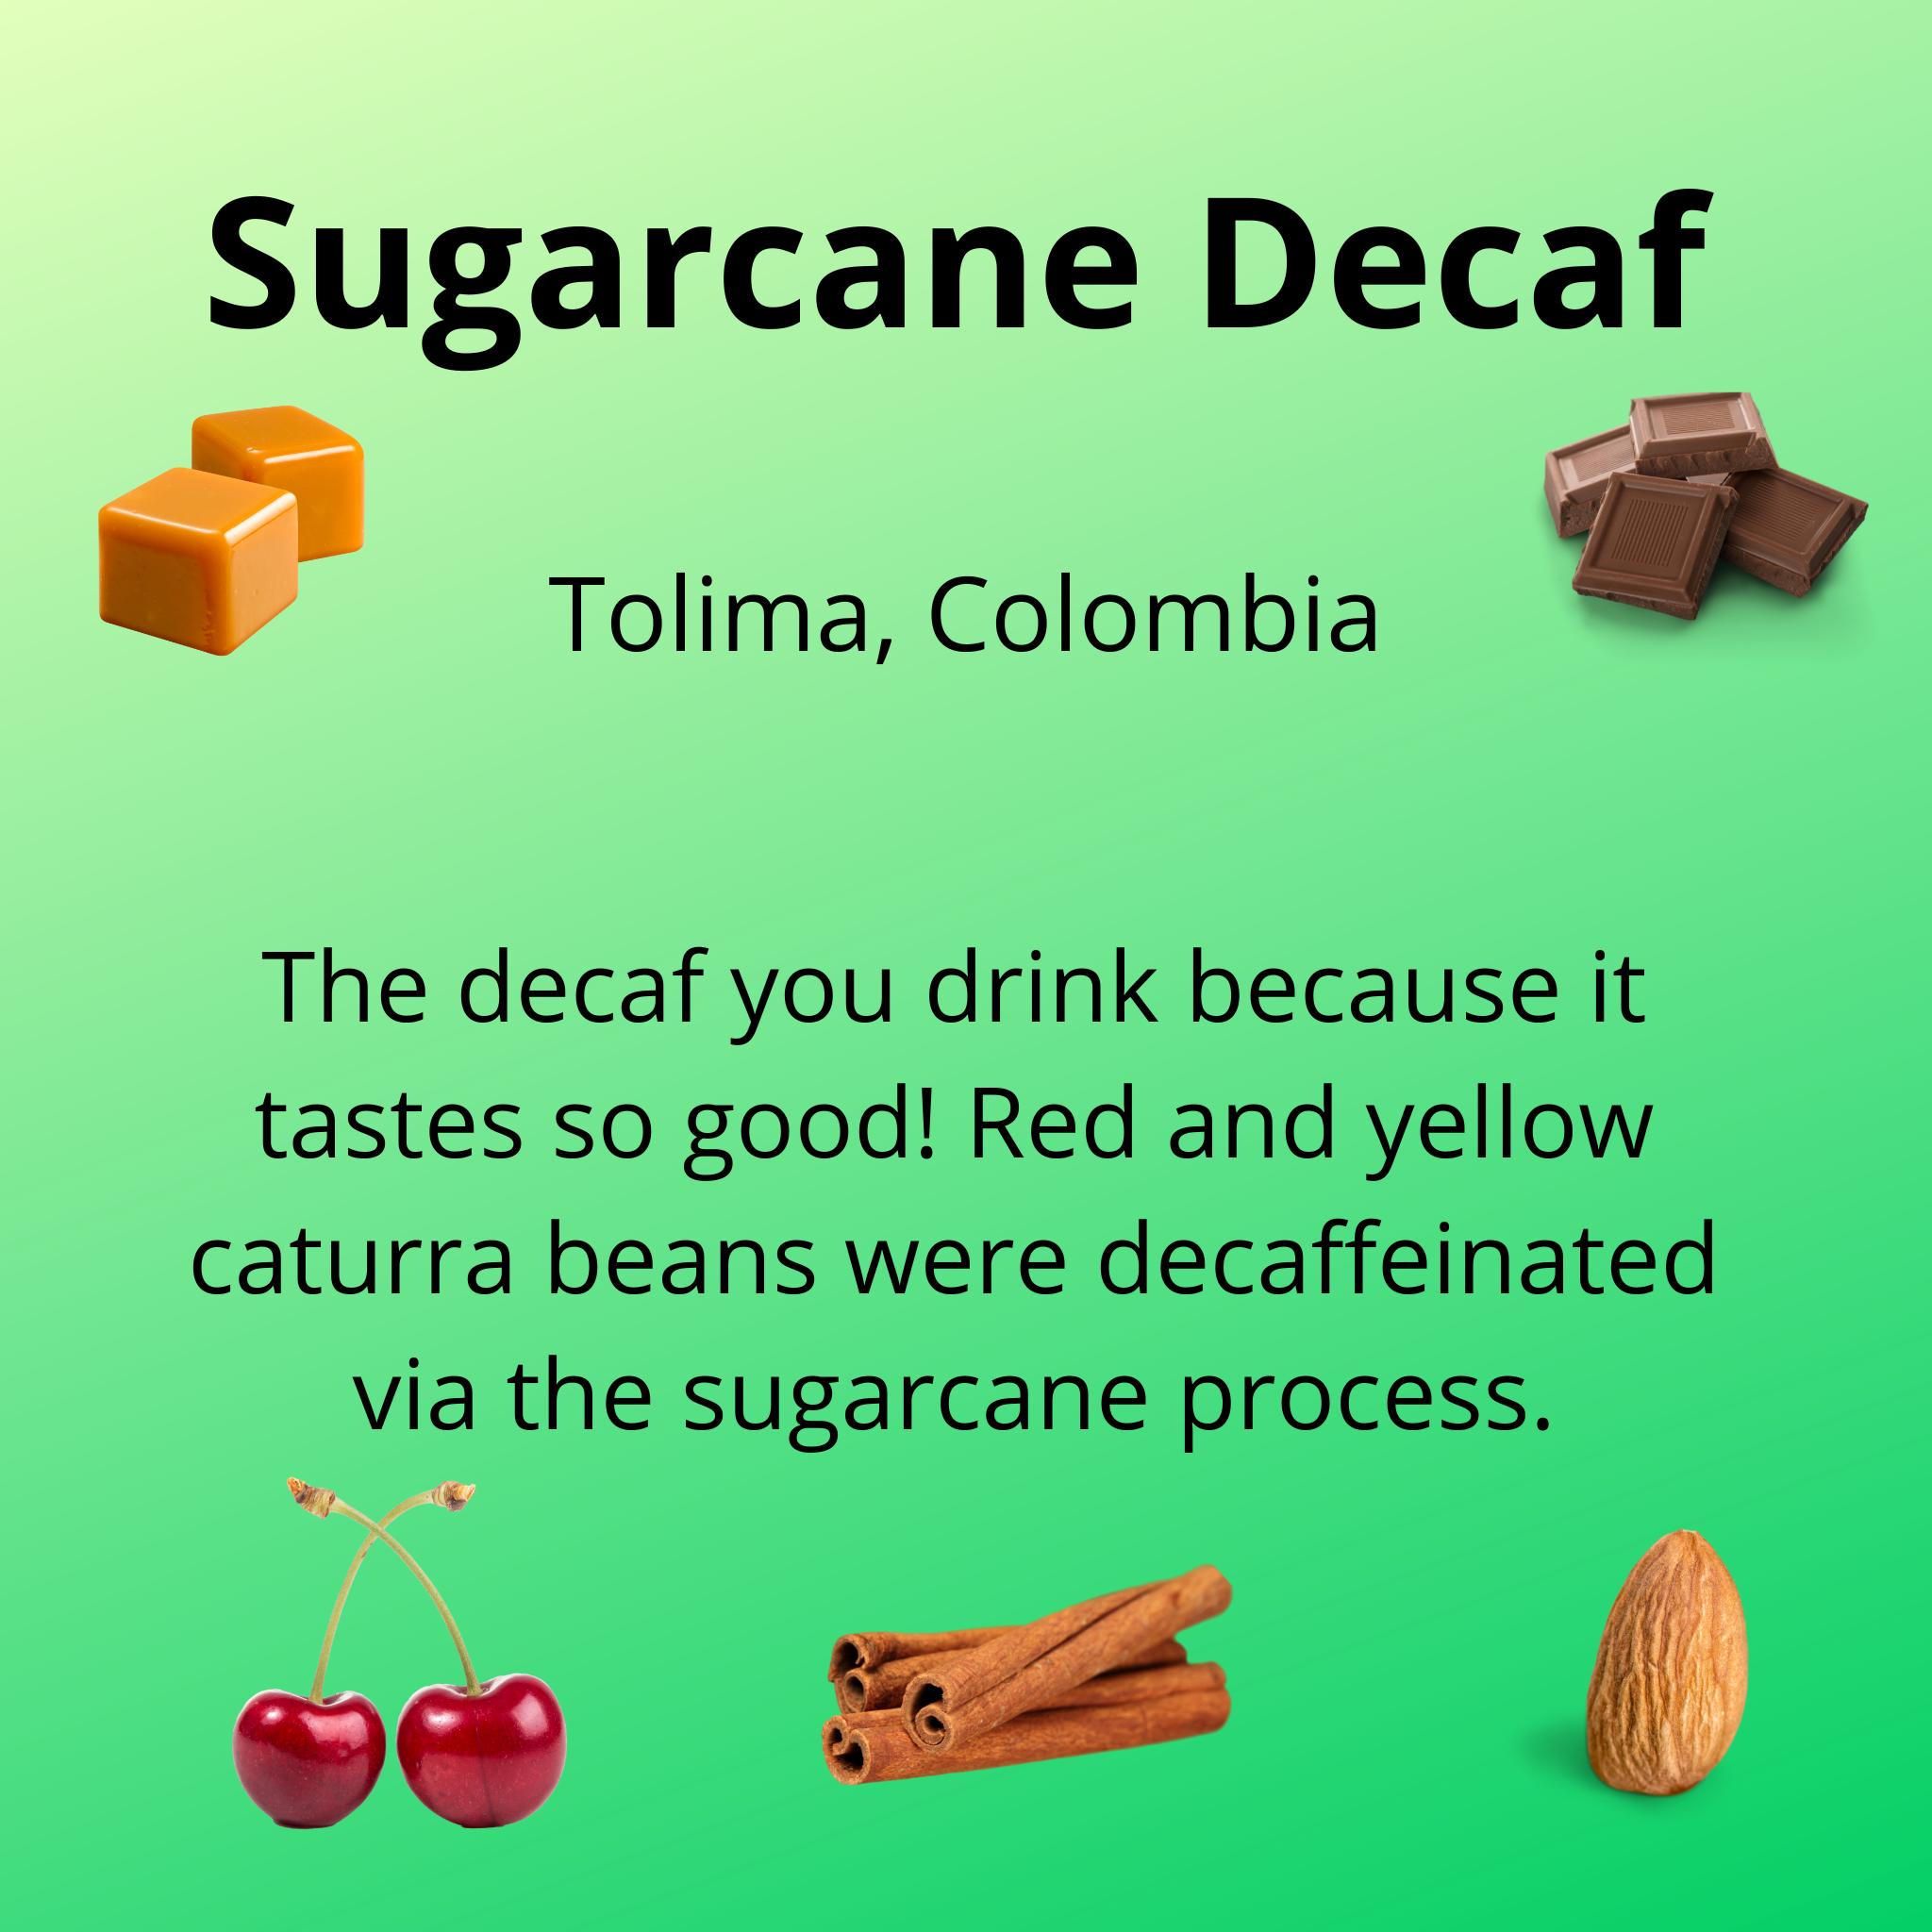 Sugarcane Decaf, Tolima, Colombia, the decaf you drink because it tastes so good, red and yellow caturra beans were decaffeinated via the sugarcane process, tasting notes, caramel, milk chocolate, cherry, cinnamon, almond